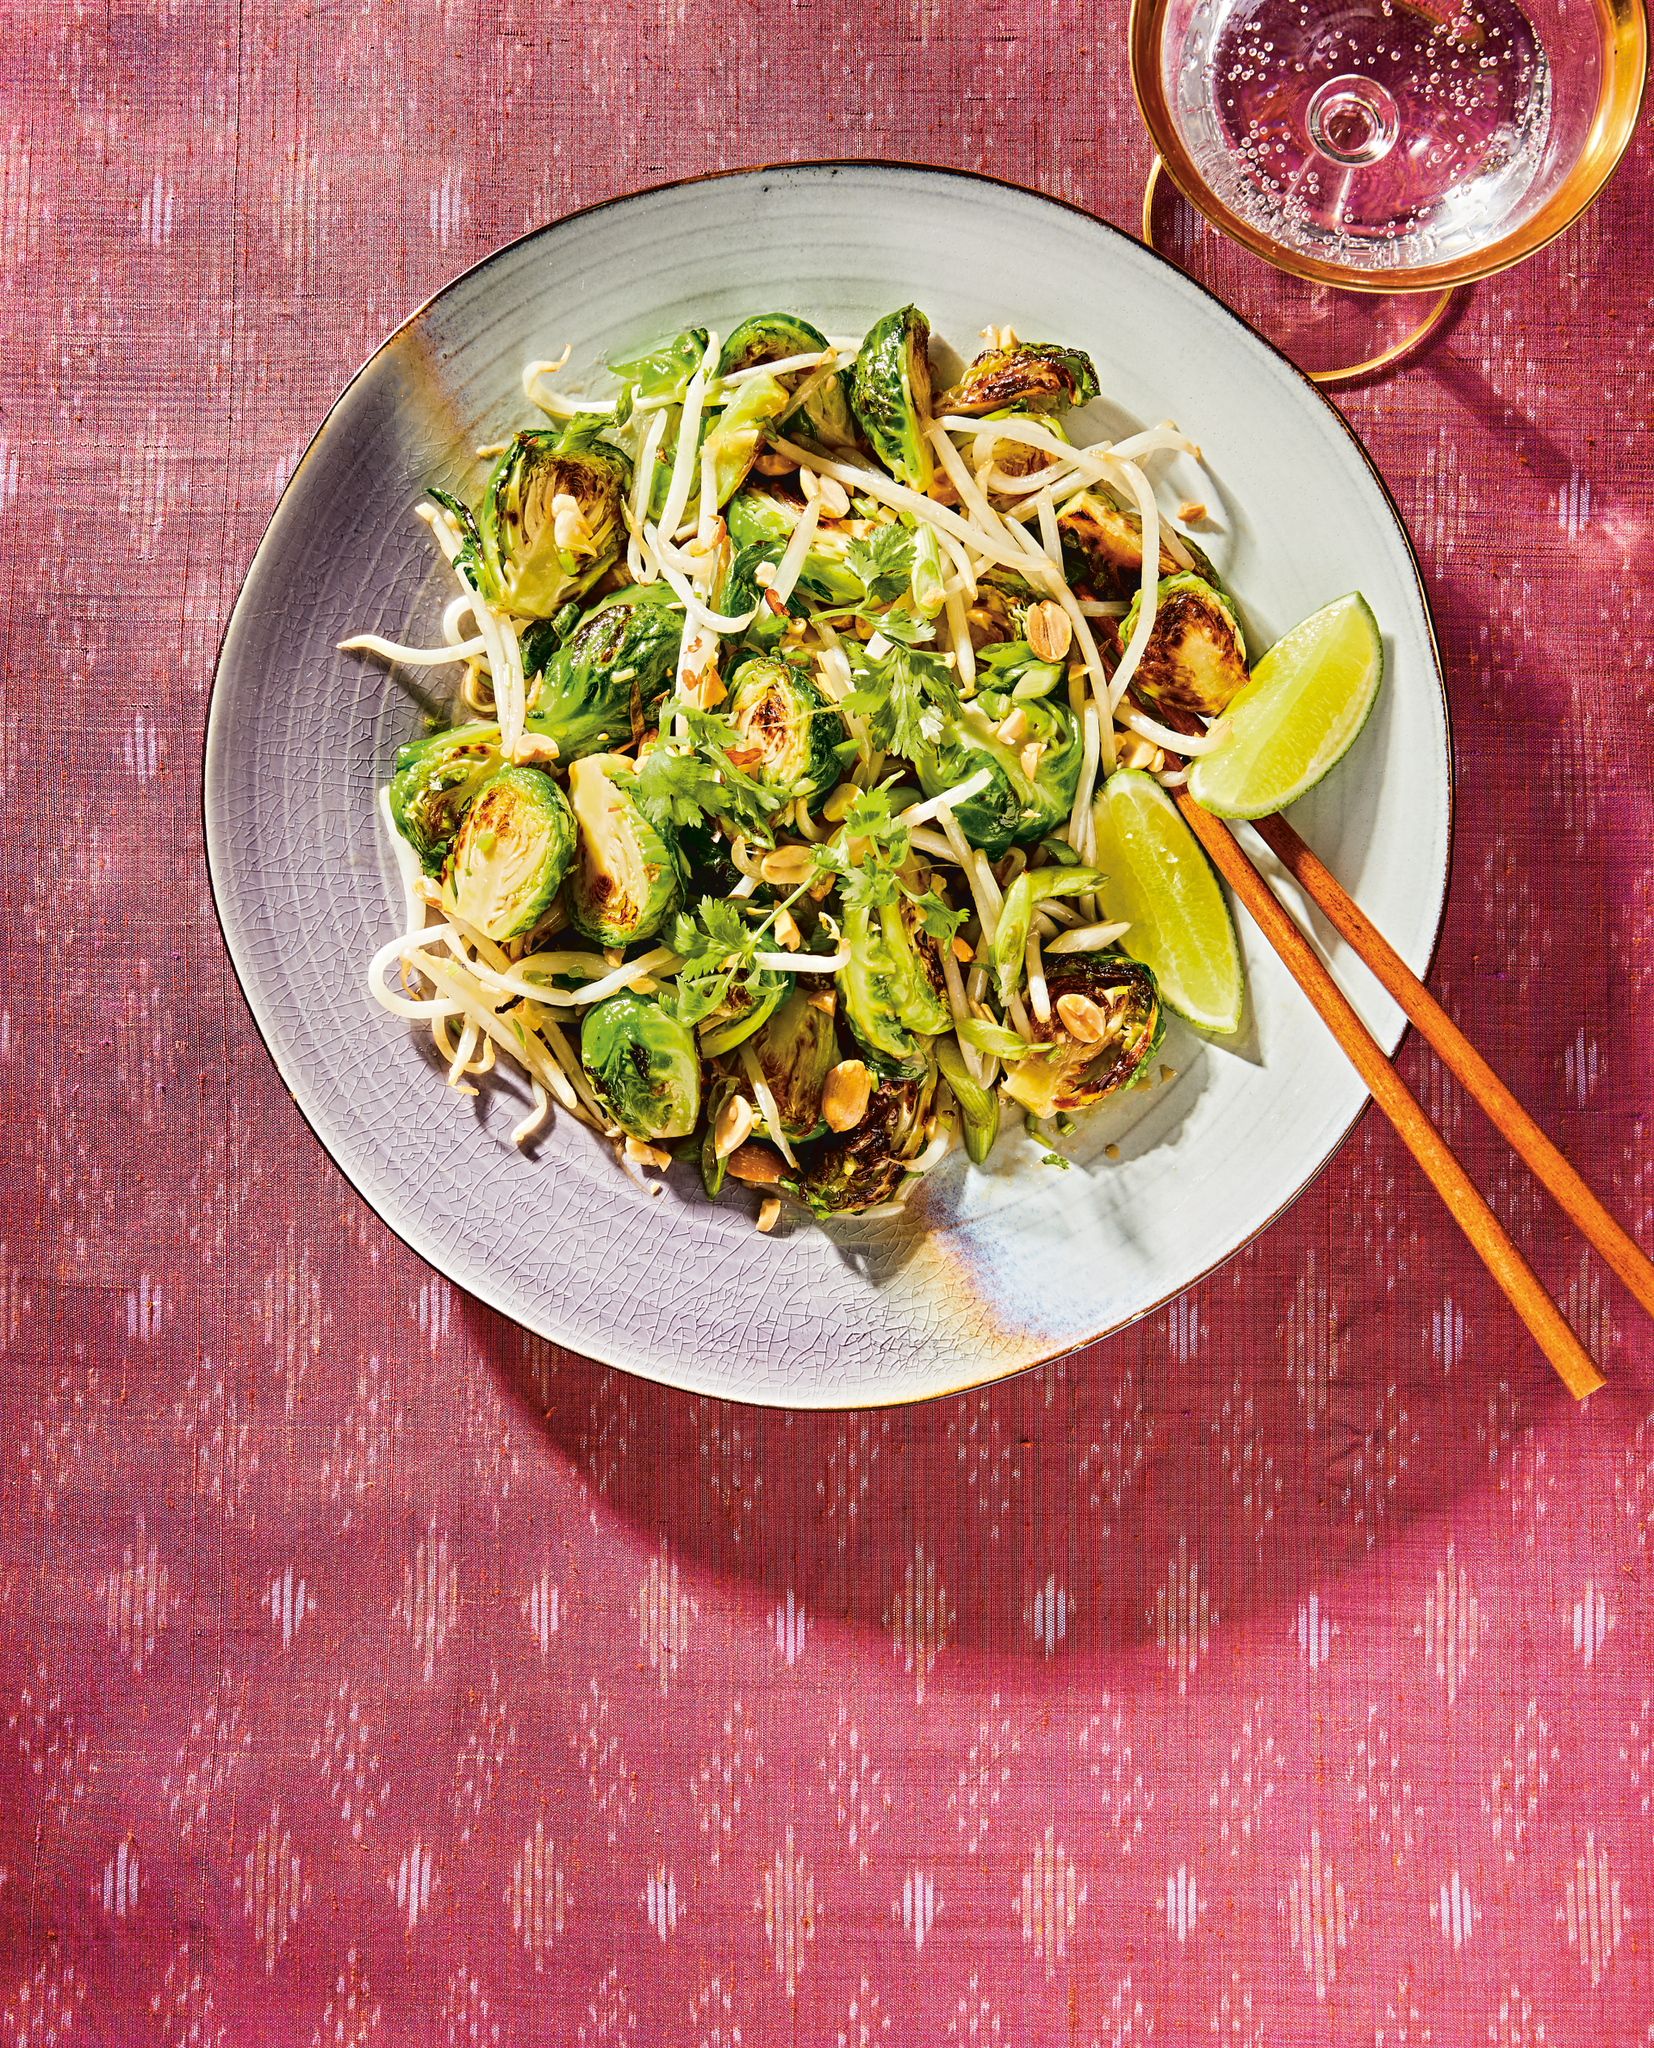 Pepper's Pad Thai Brussels Sprouts